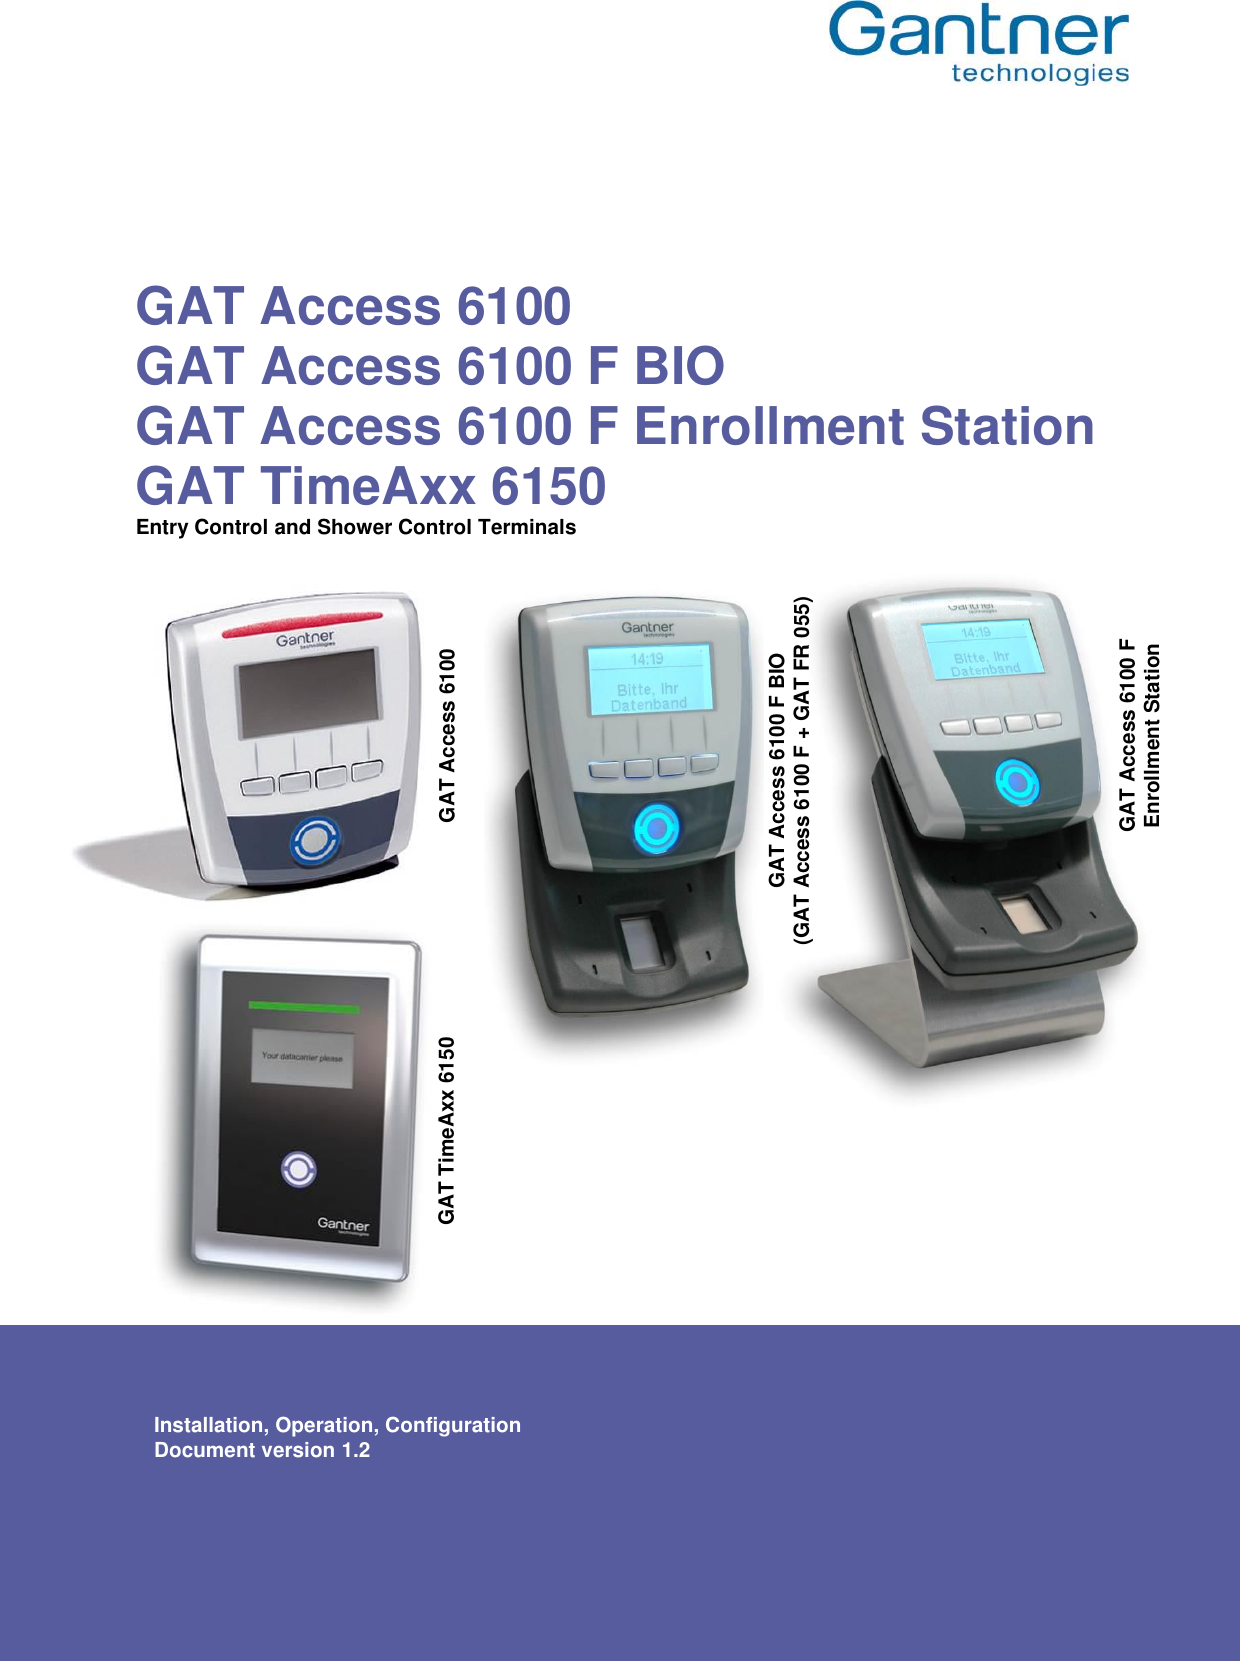    GAT Access 6100 GAT Access 6100 F BIO GAT Access 6100 F Enrollment Station GAT TimeAxx 6150 Entry Control and Shower Control Terminals                                       Installation, Operation, Configuration Document version 1.2 GAT Access 6100 GAT Access 6100 F BIO (GAT Access 6100 F + GAT FR 055) GAT Access 6100 F Enrollment Station GAT TimeAxx 6150 